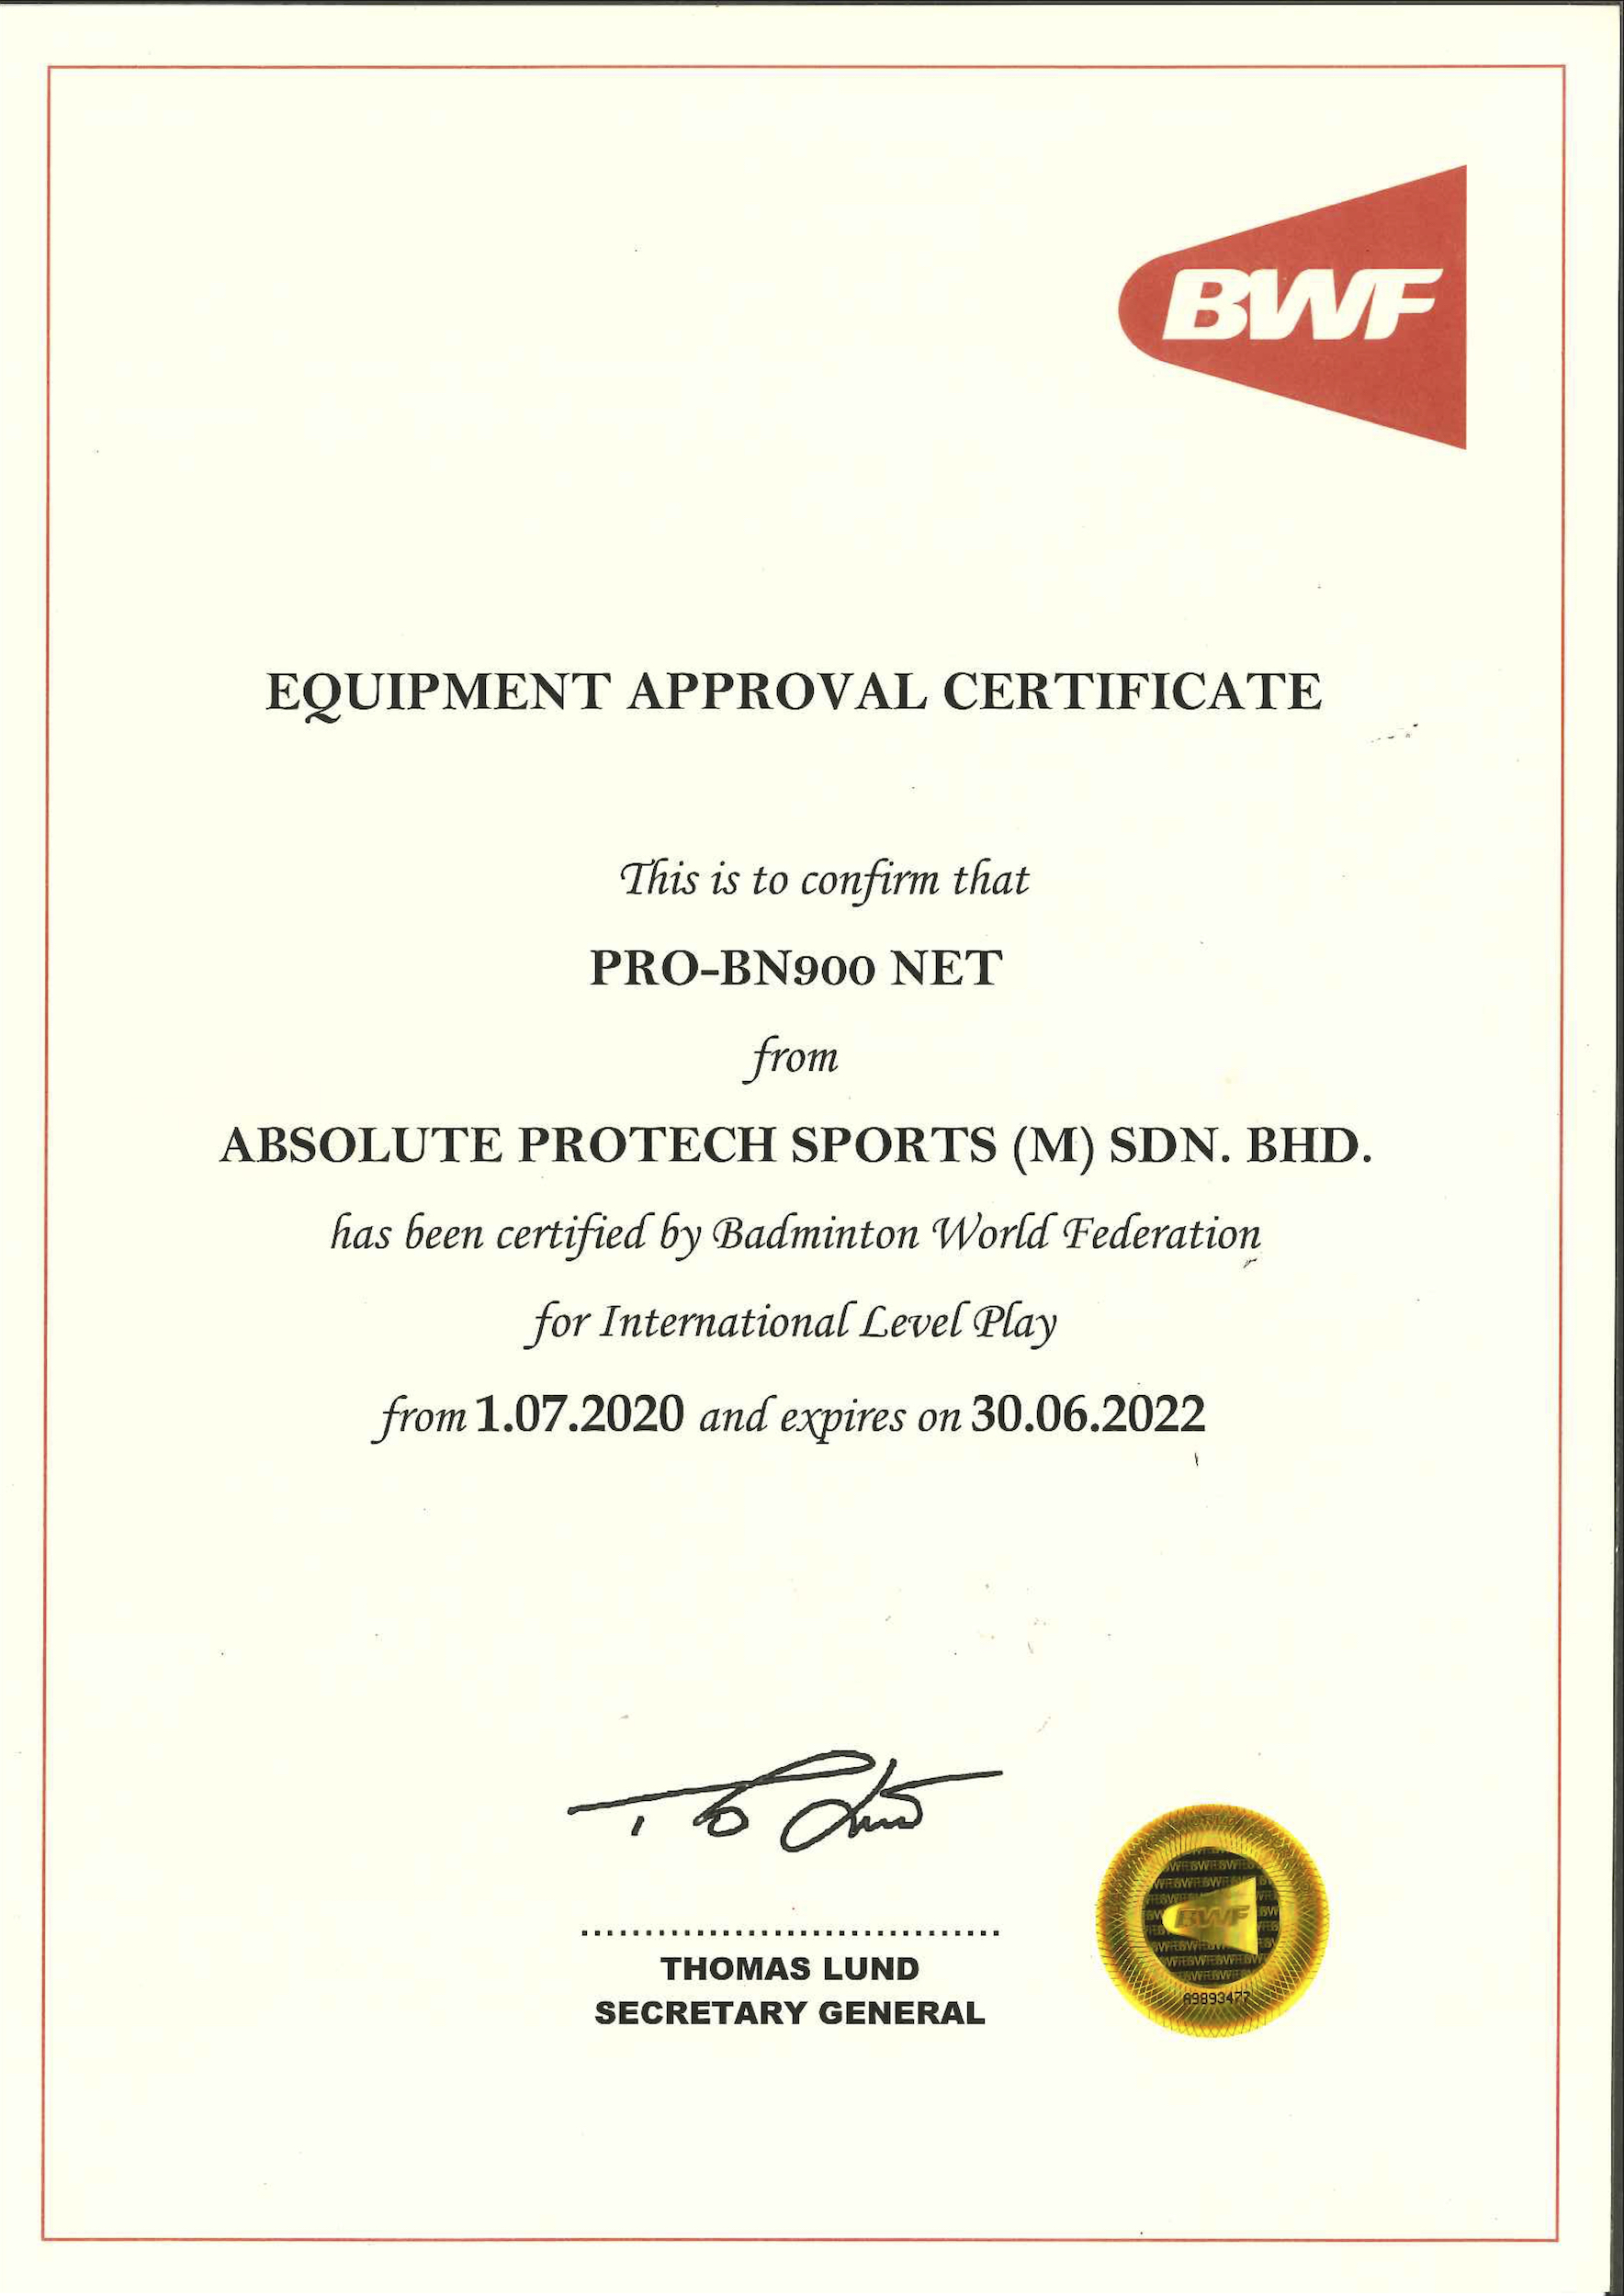 Protech-Bwf approved equpiments